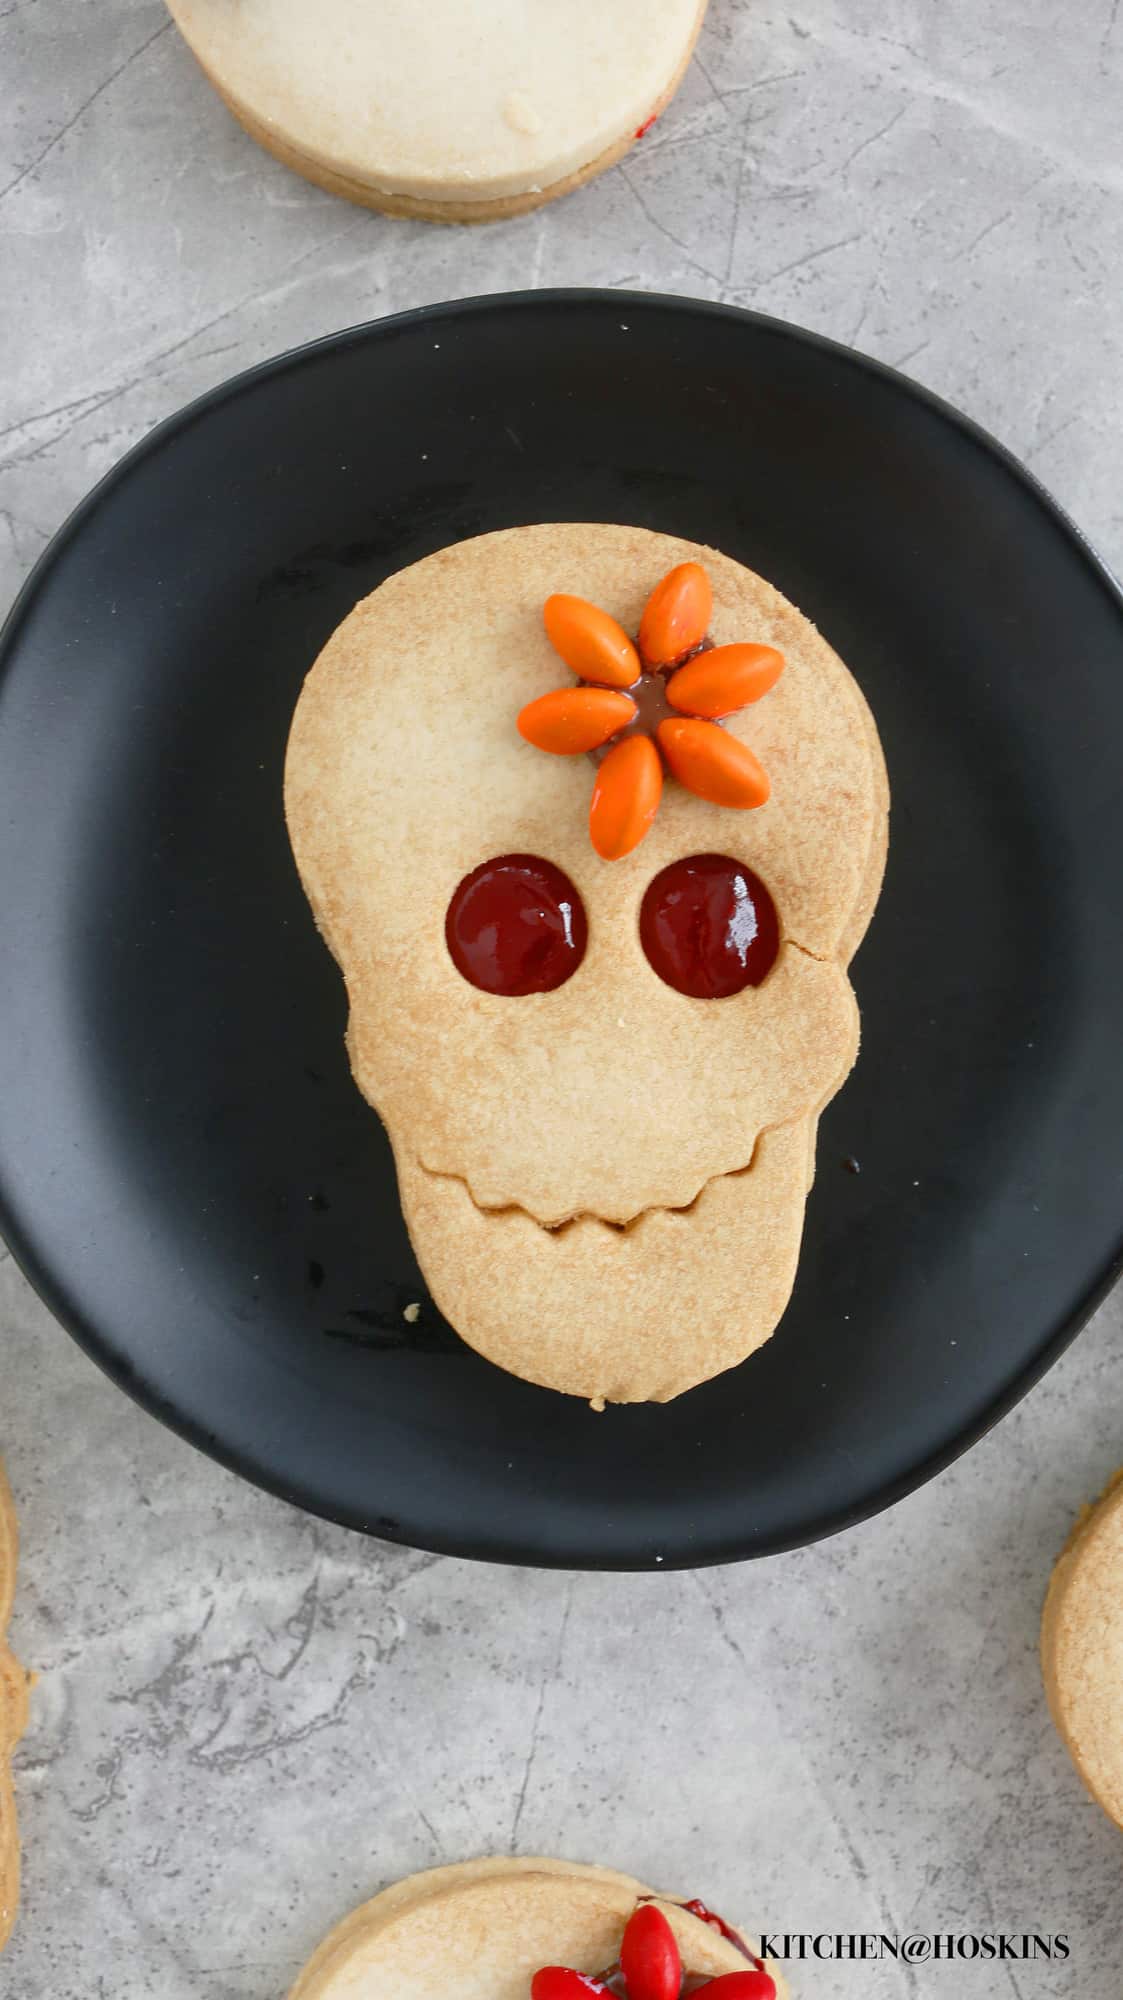 A halloween cookie in the shape of a skull on a black plate.